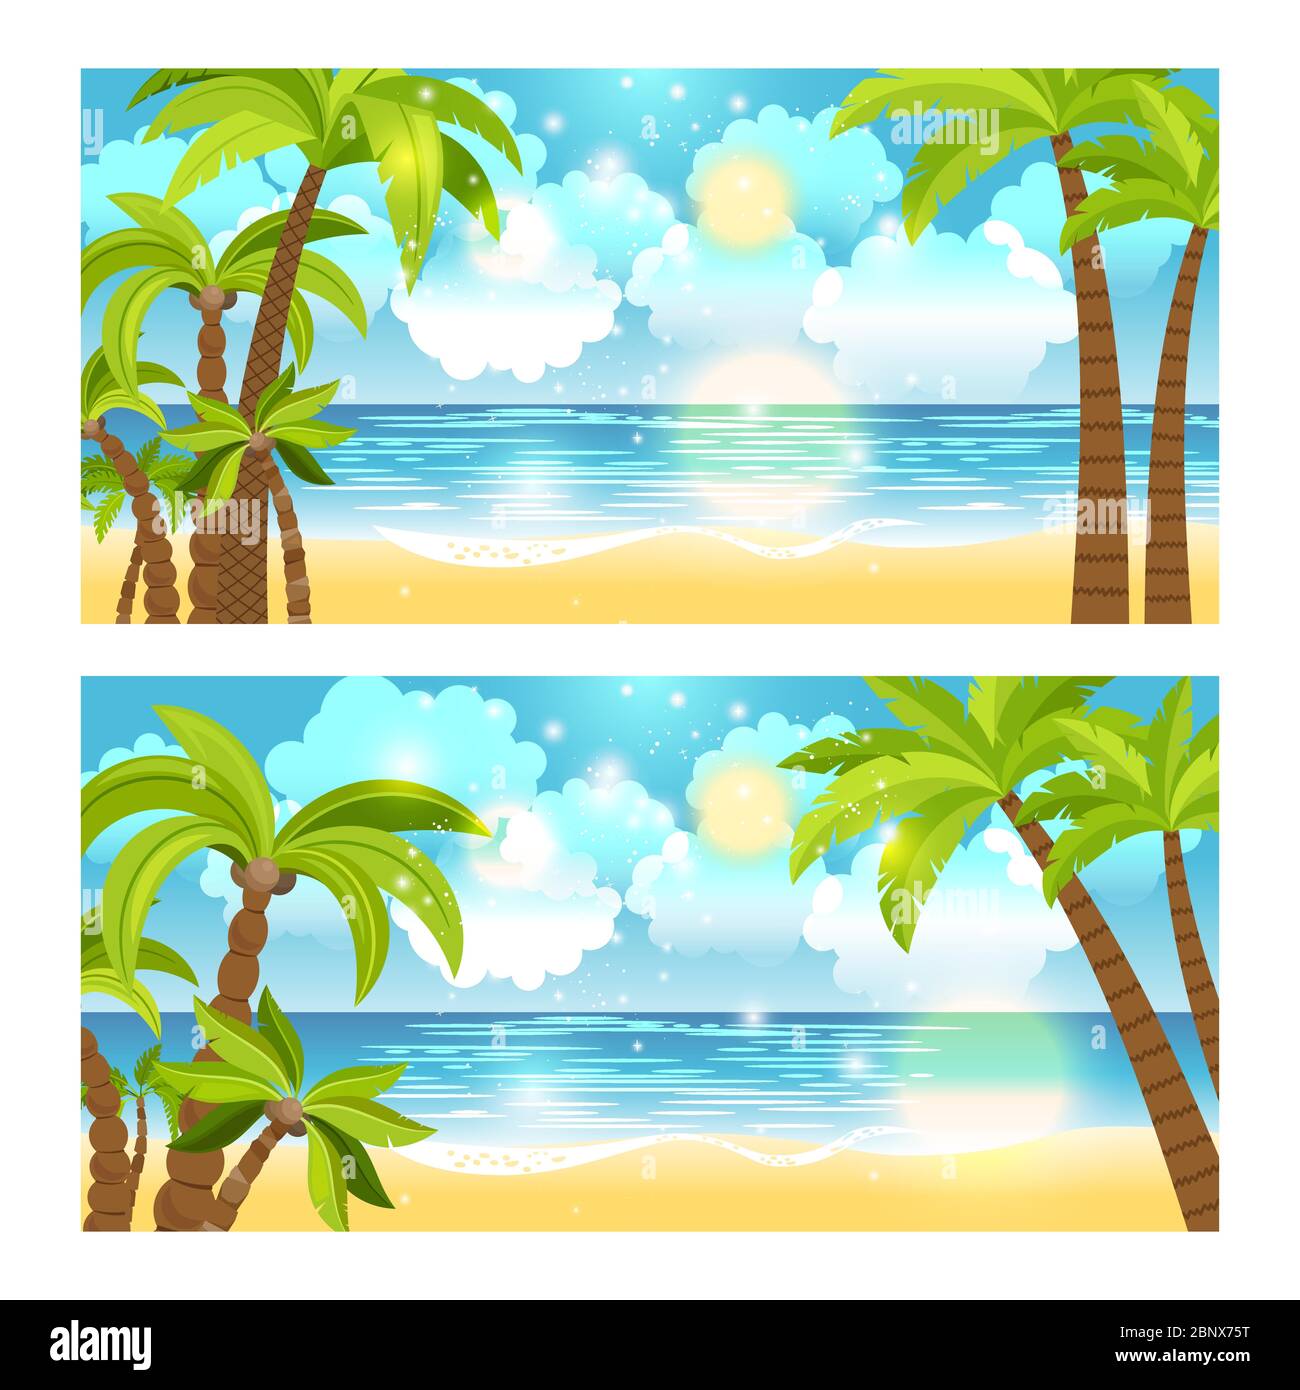 Summer Season Drawing Step by Step - Scenery drawing for beginner - YouTube